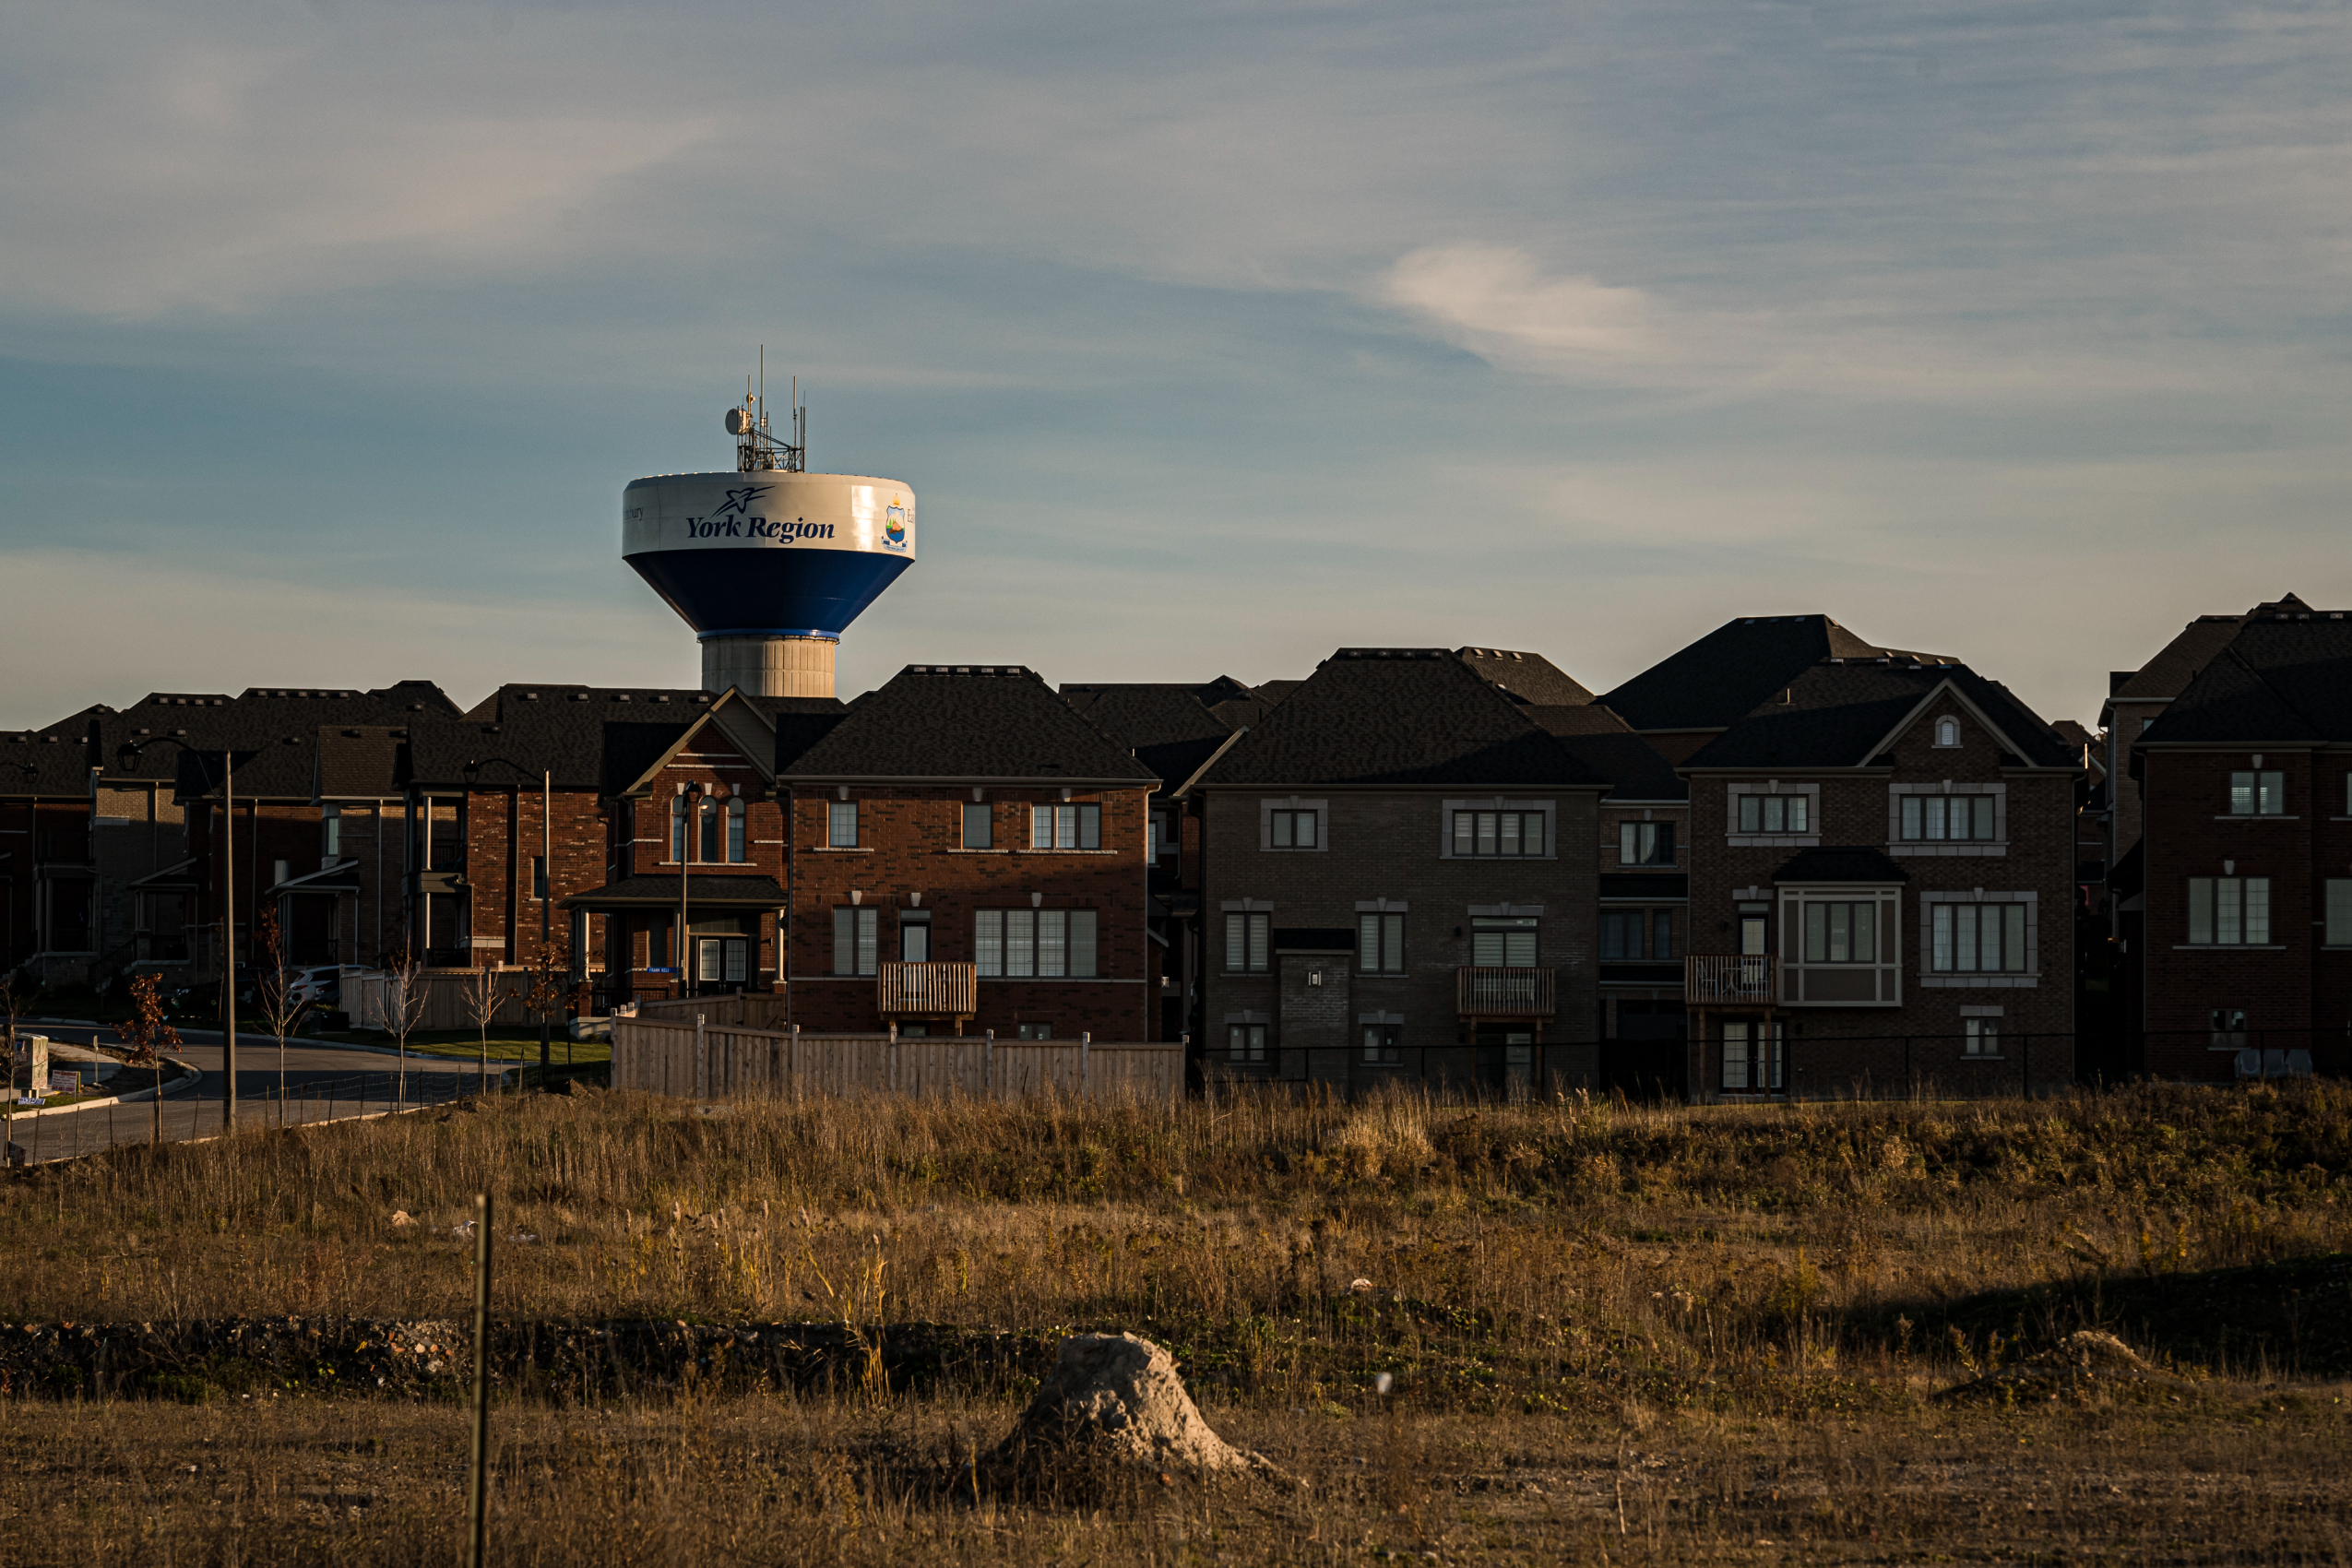 Tightly packed suburbs with a York Region water tower